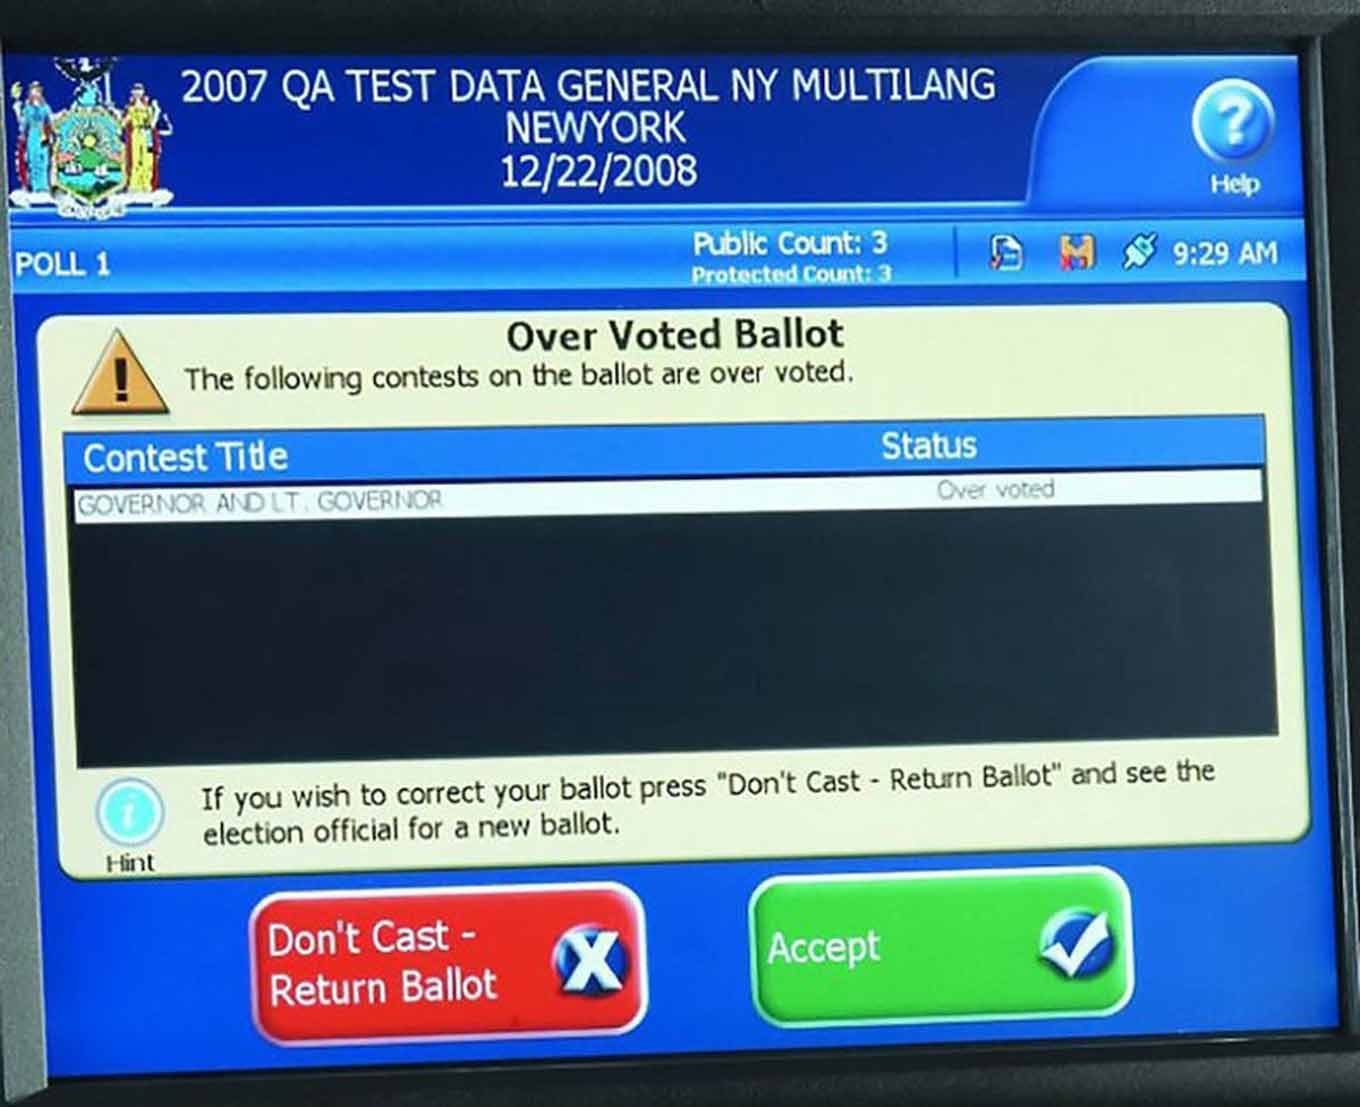 The screen for New York's voting in 2008